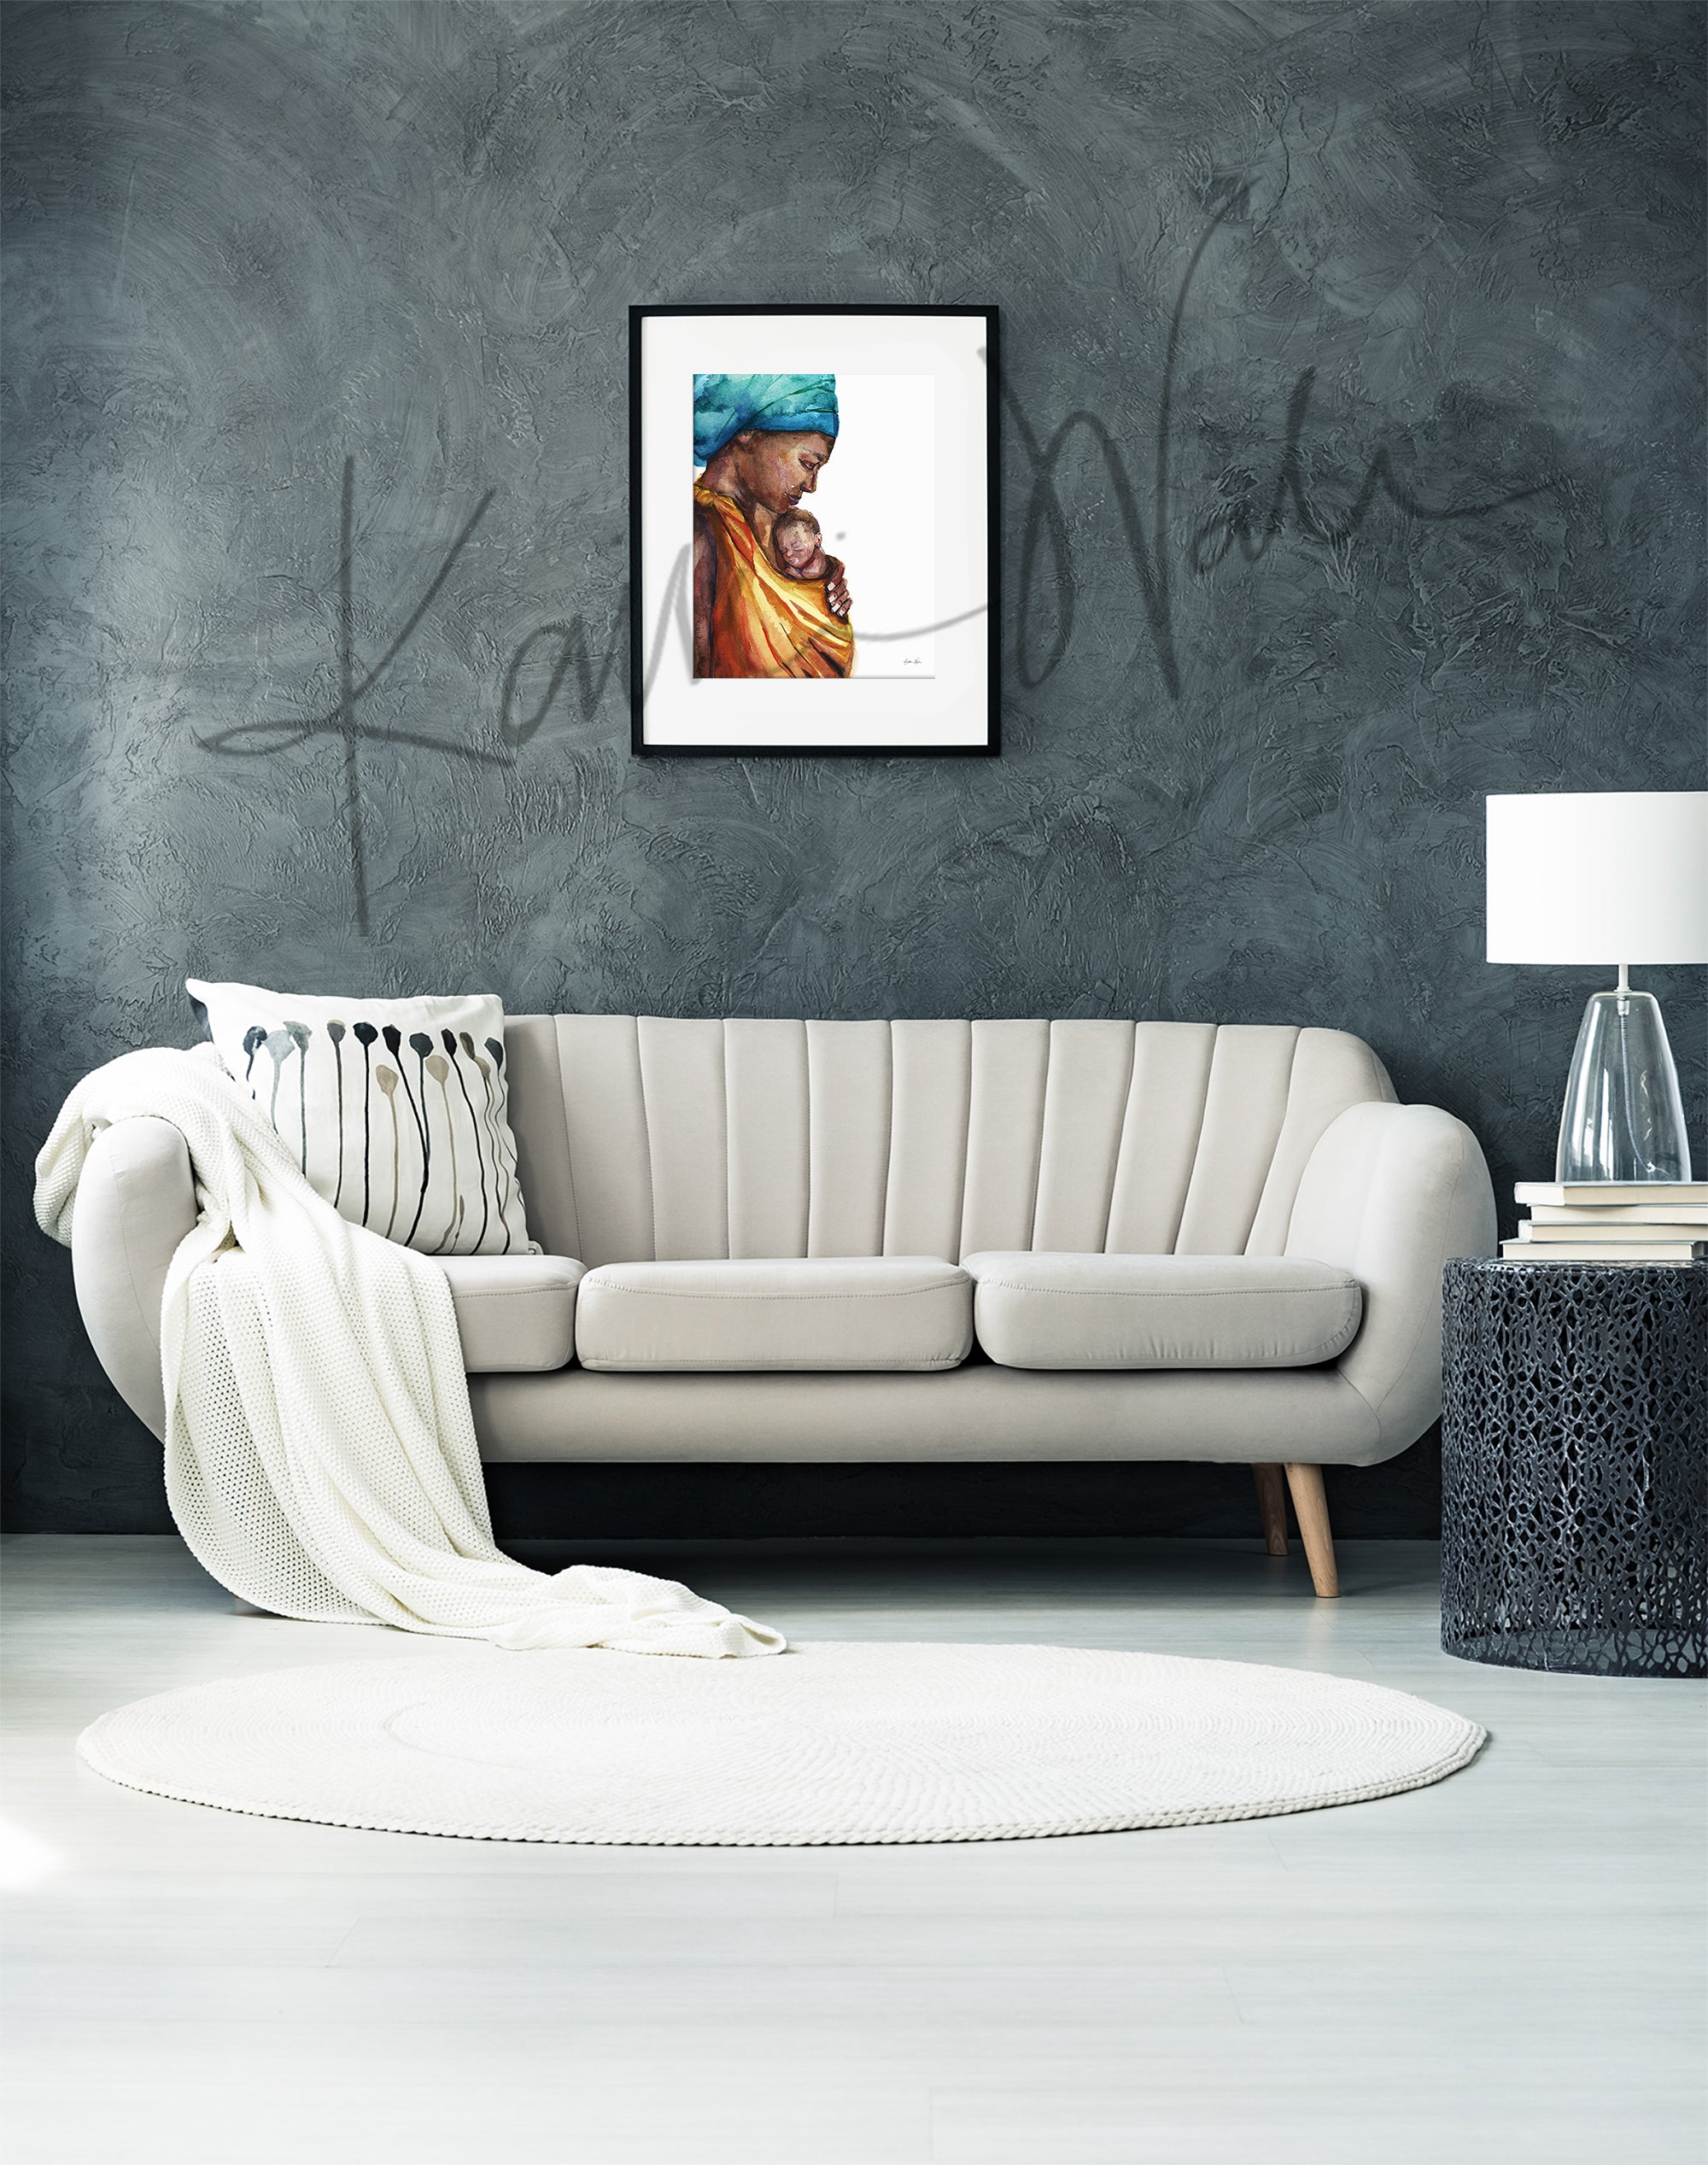 Framed watercolor painting of an african woman holding her premature infant. The painting is hanging over a beige couch.